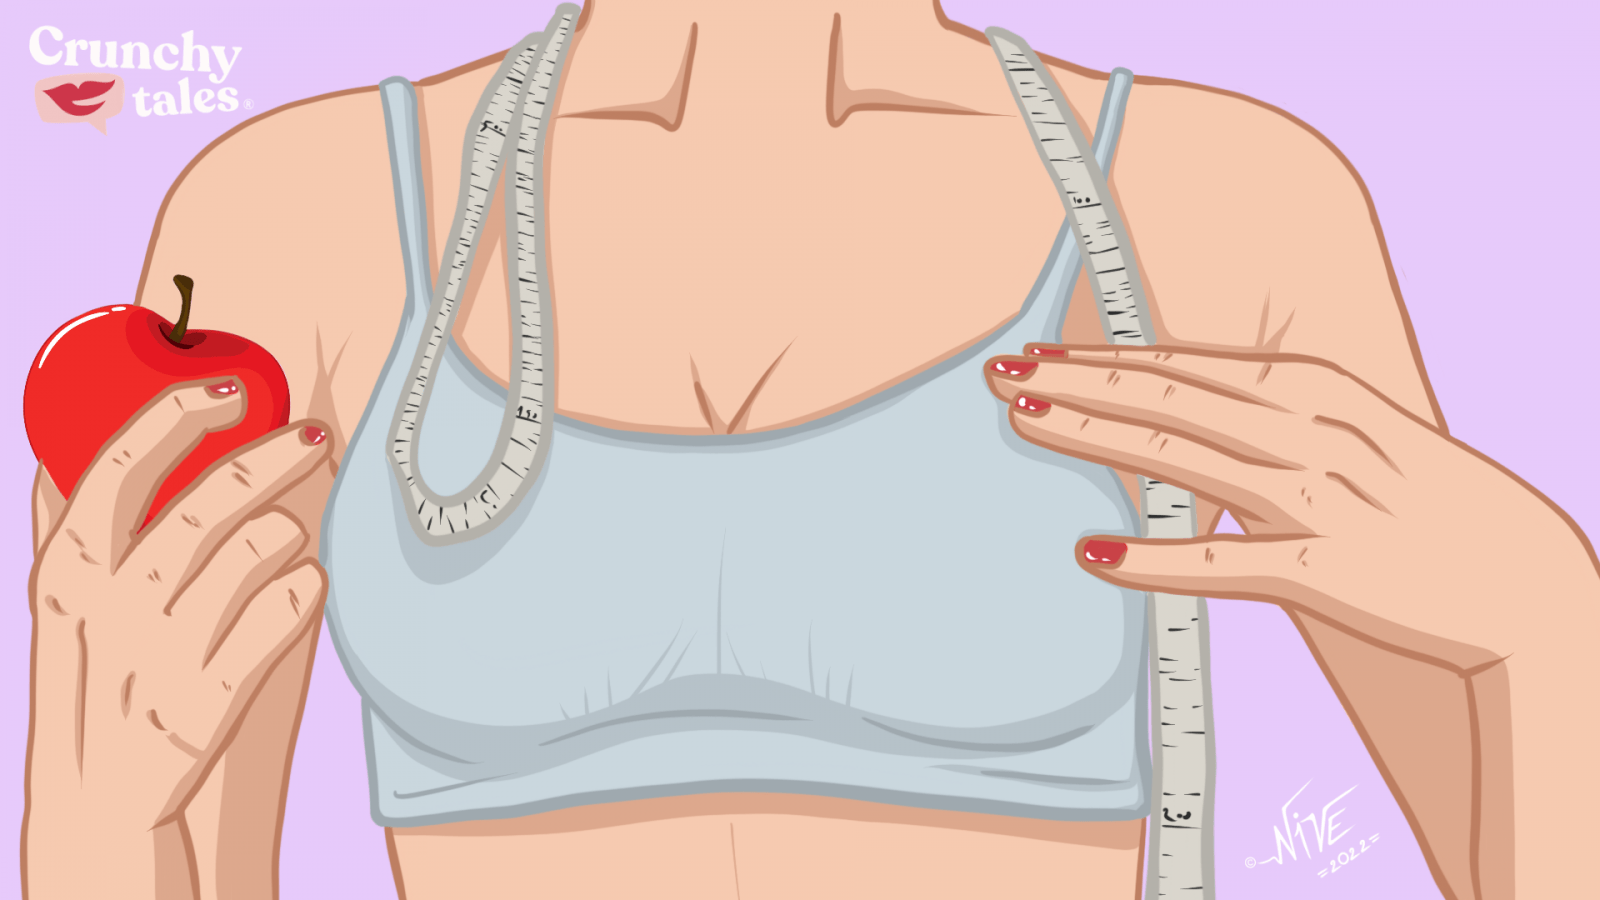 Saggy Breasts? Give Them A Boost With These 6 Lifestyle Changes